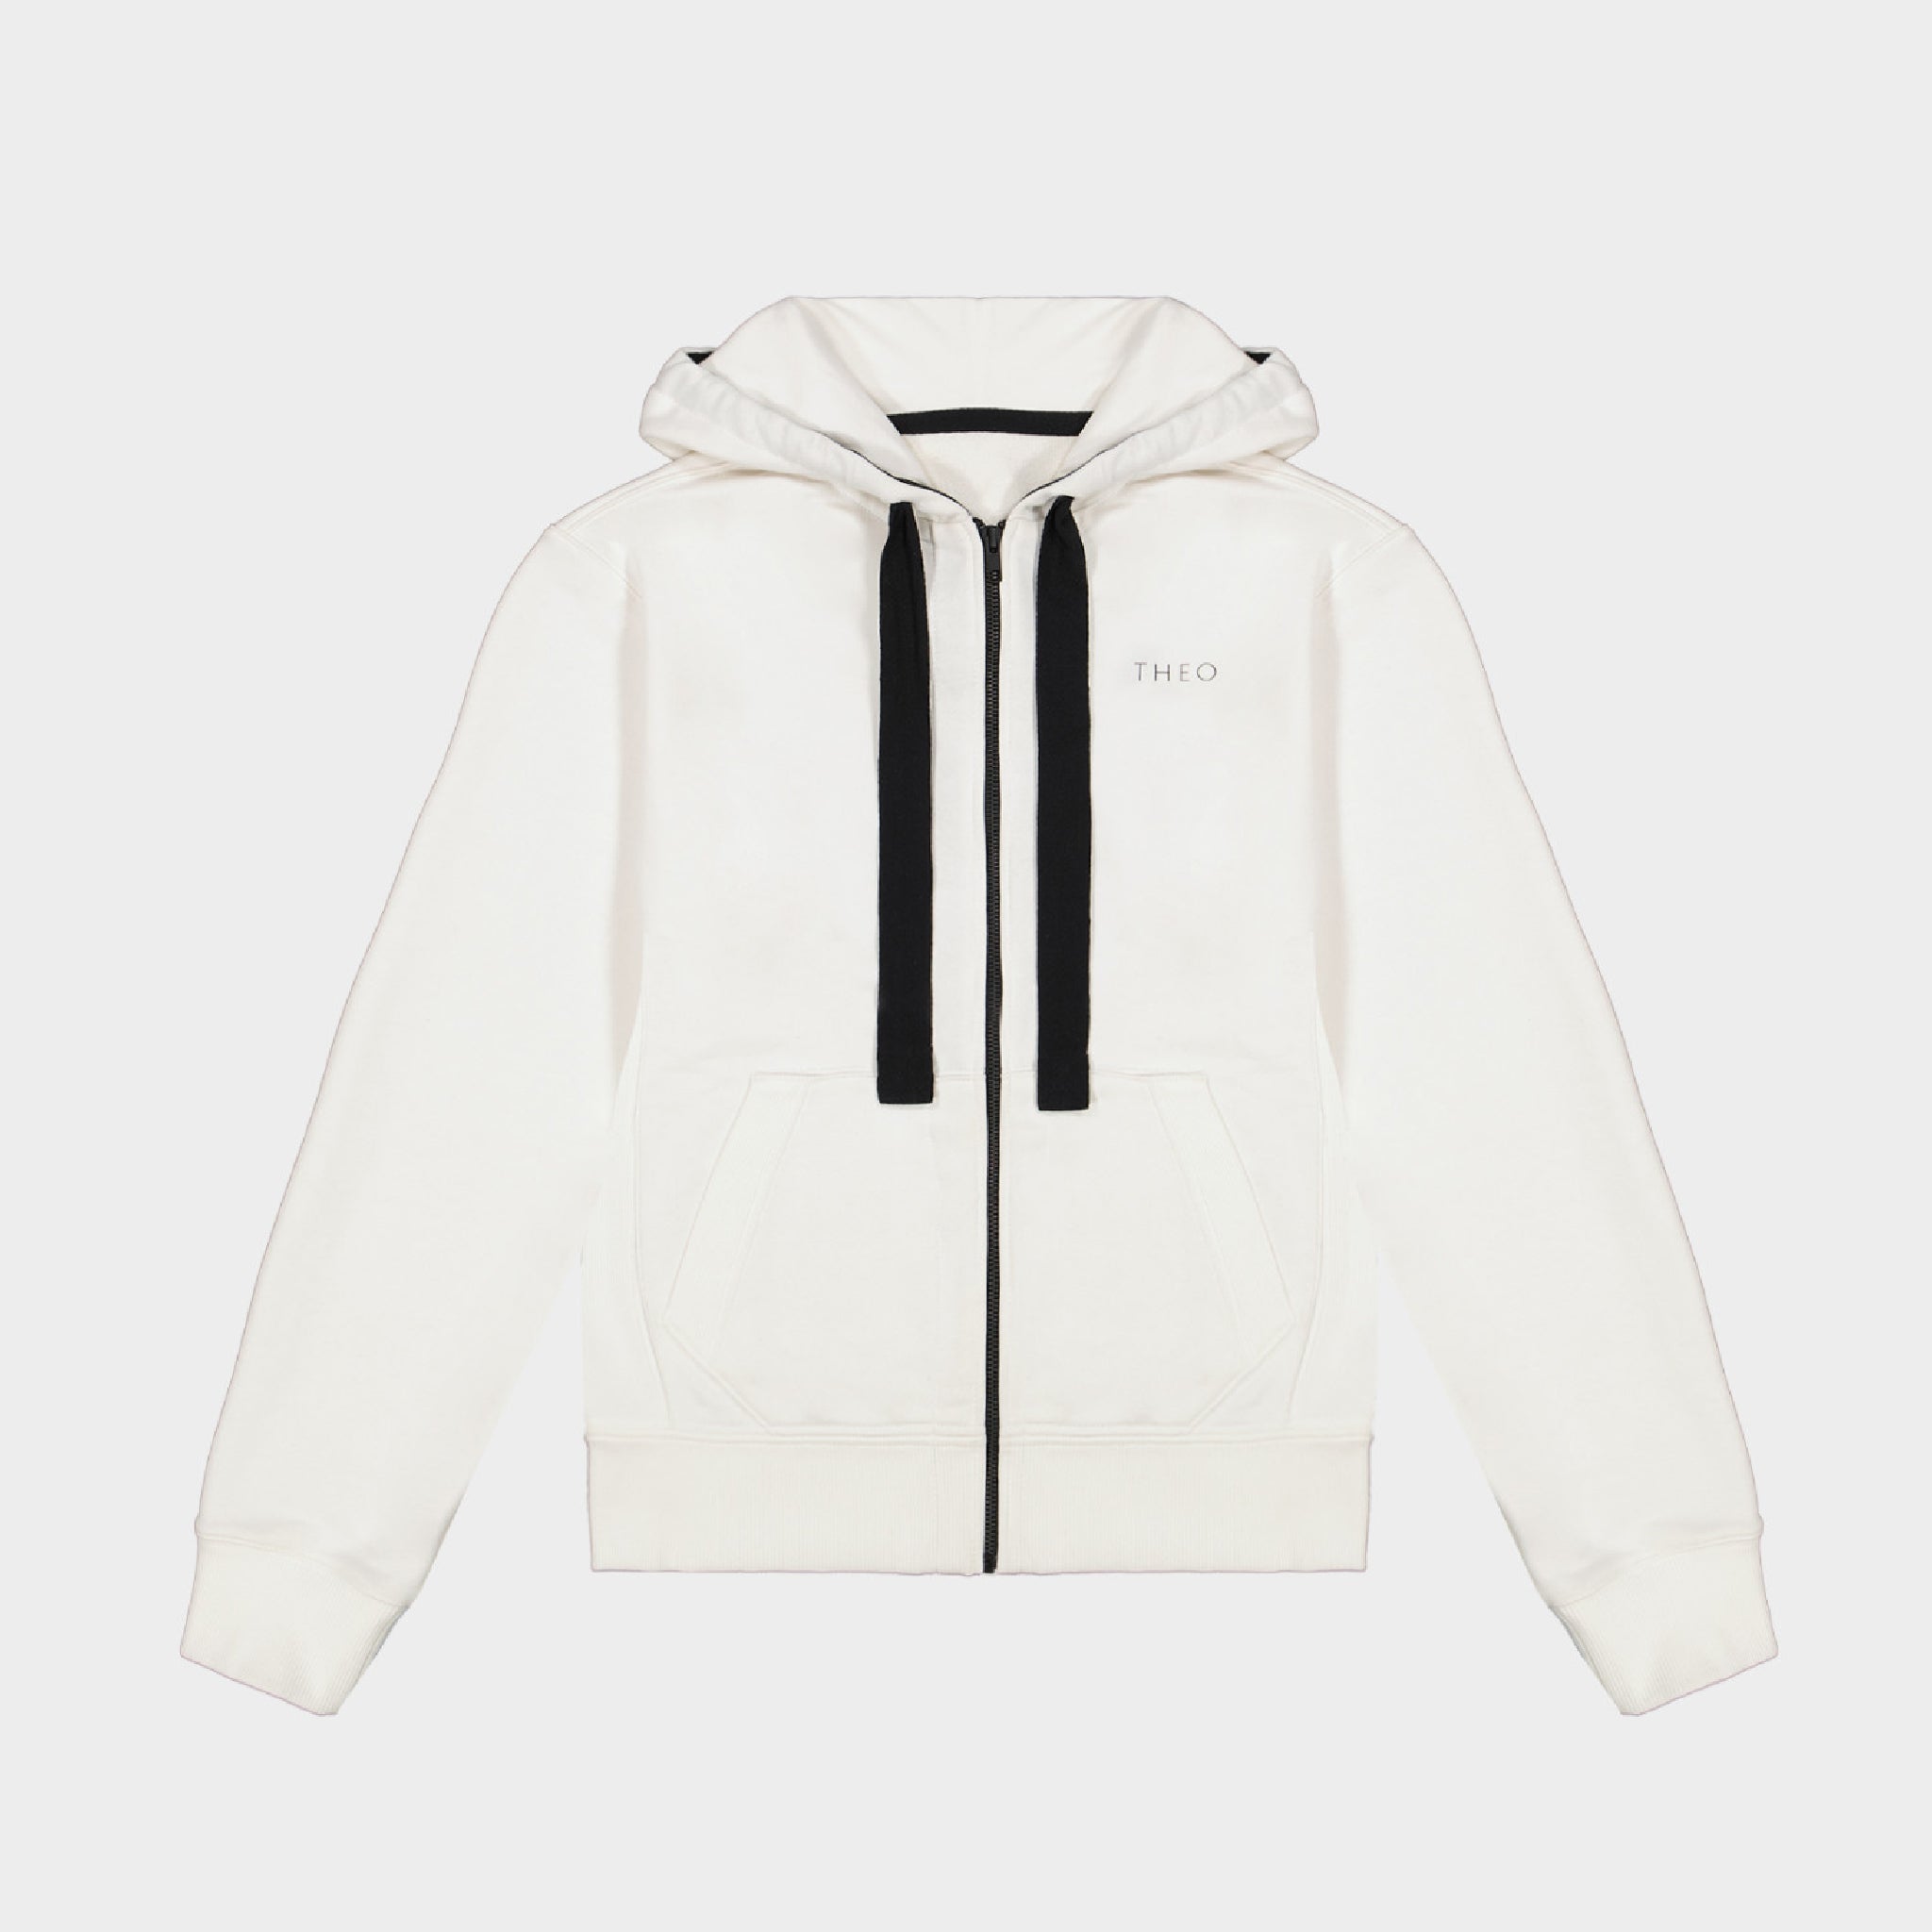 ZIP-UP HOODIE WITH THEO LOGO